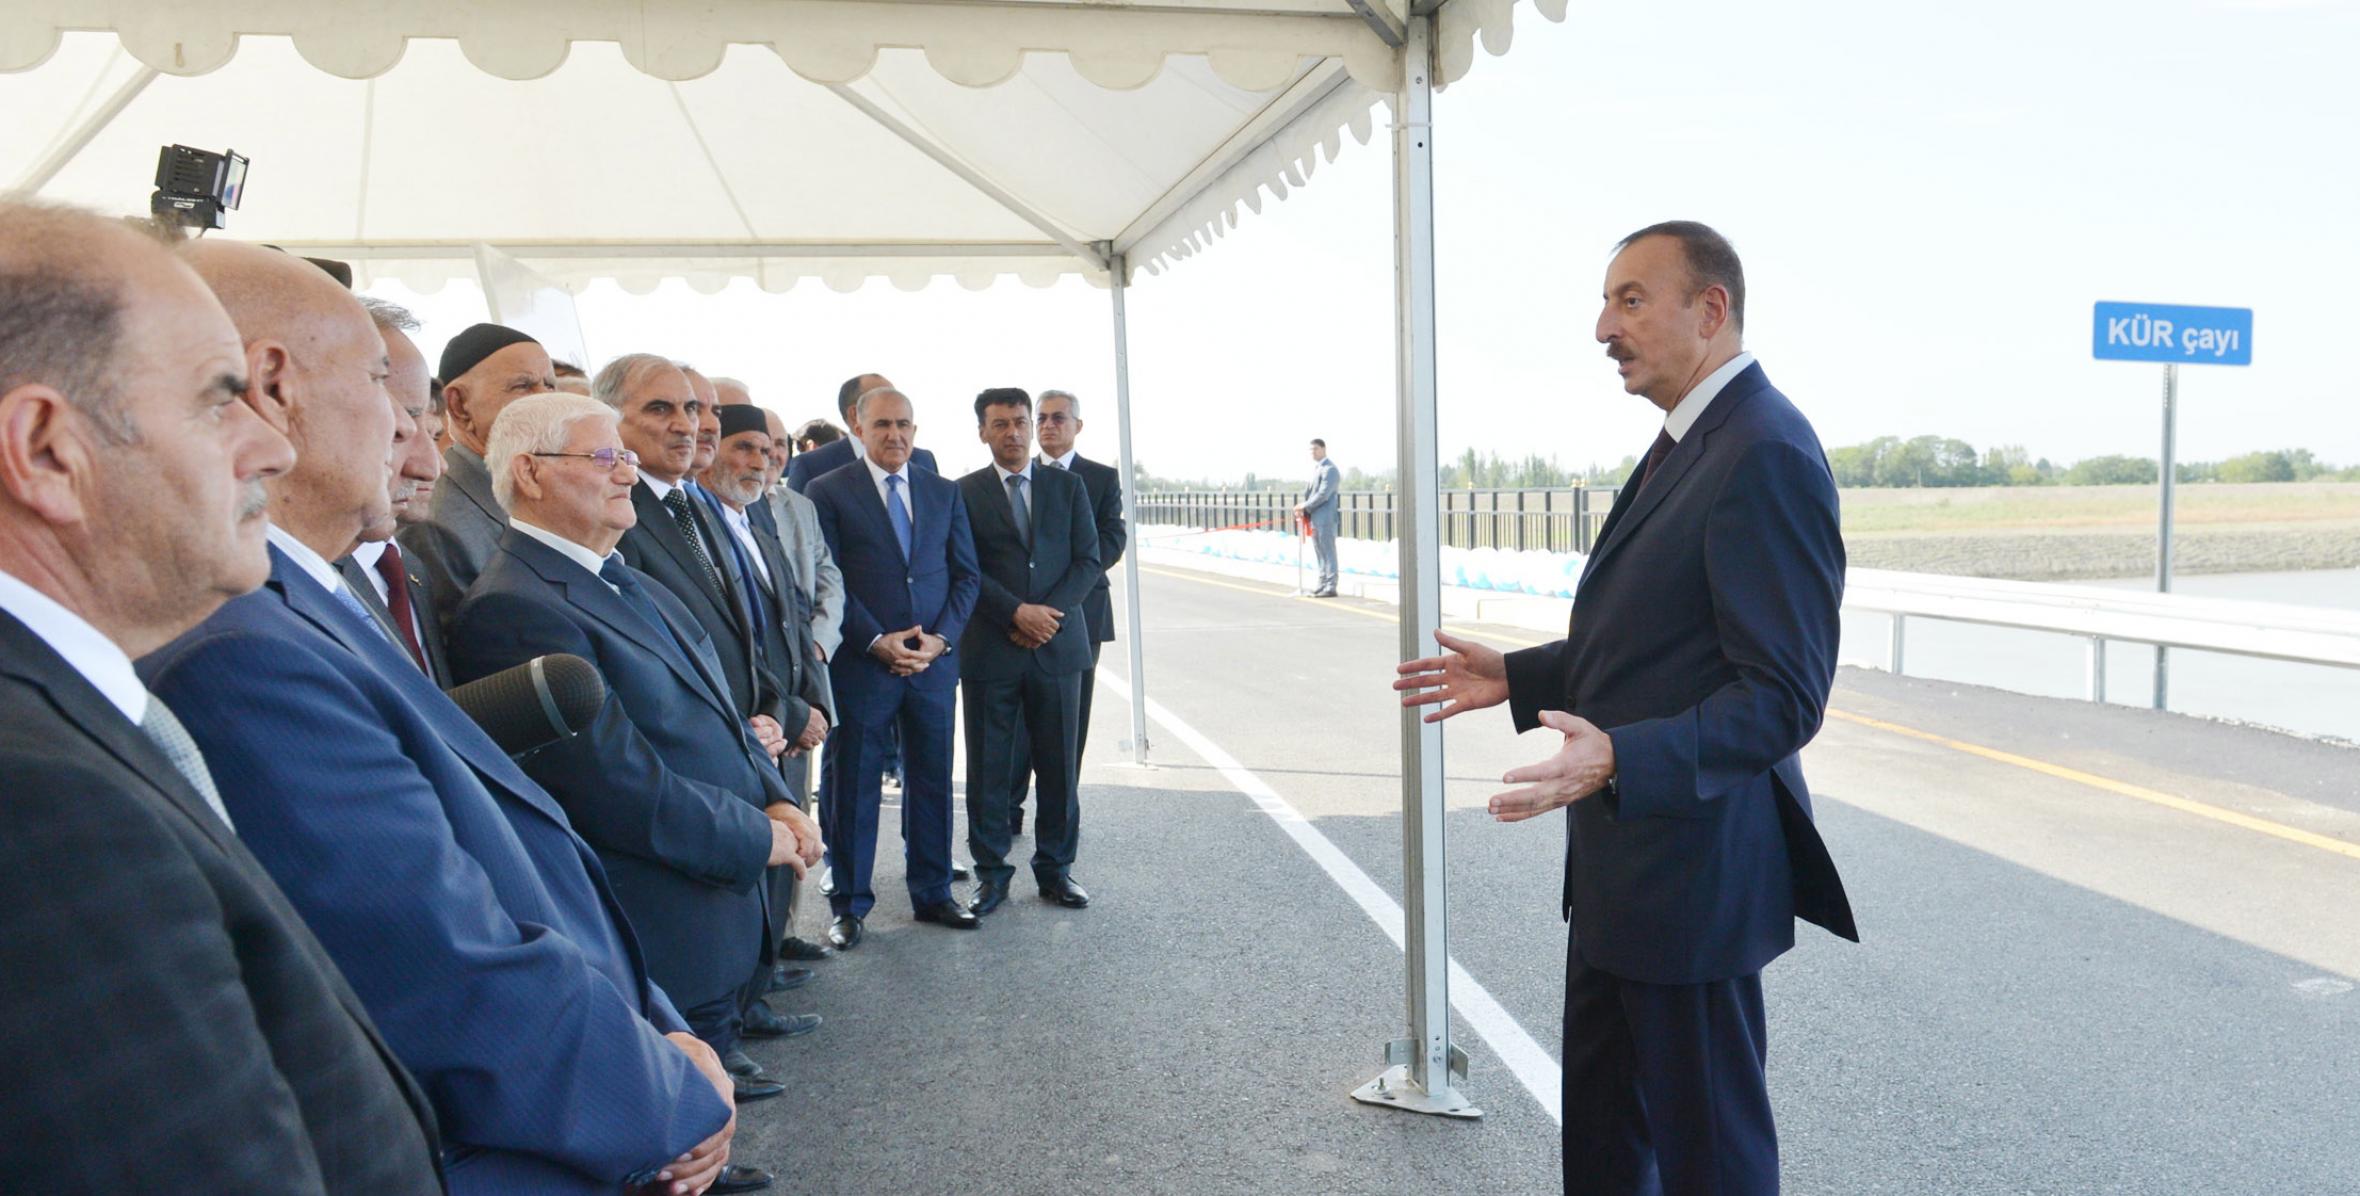 Ilham Aliyev attended the opening of a new bridge over the Kura River in Sabirabad